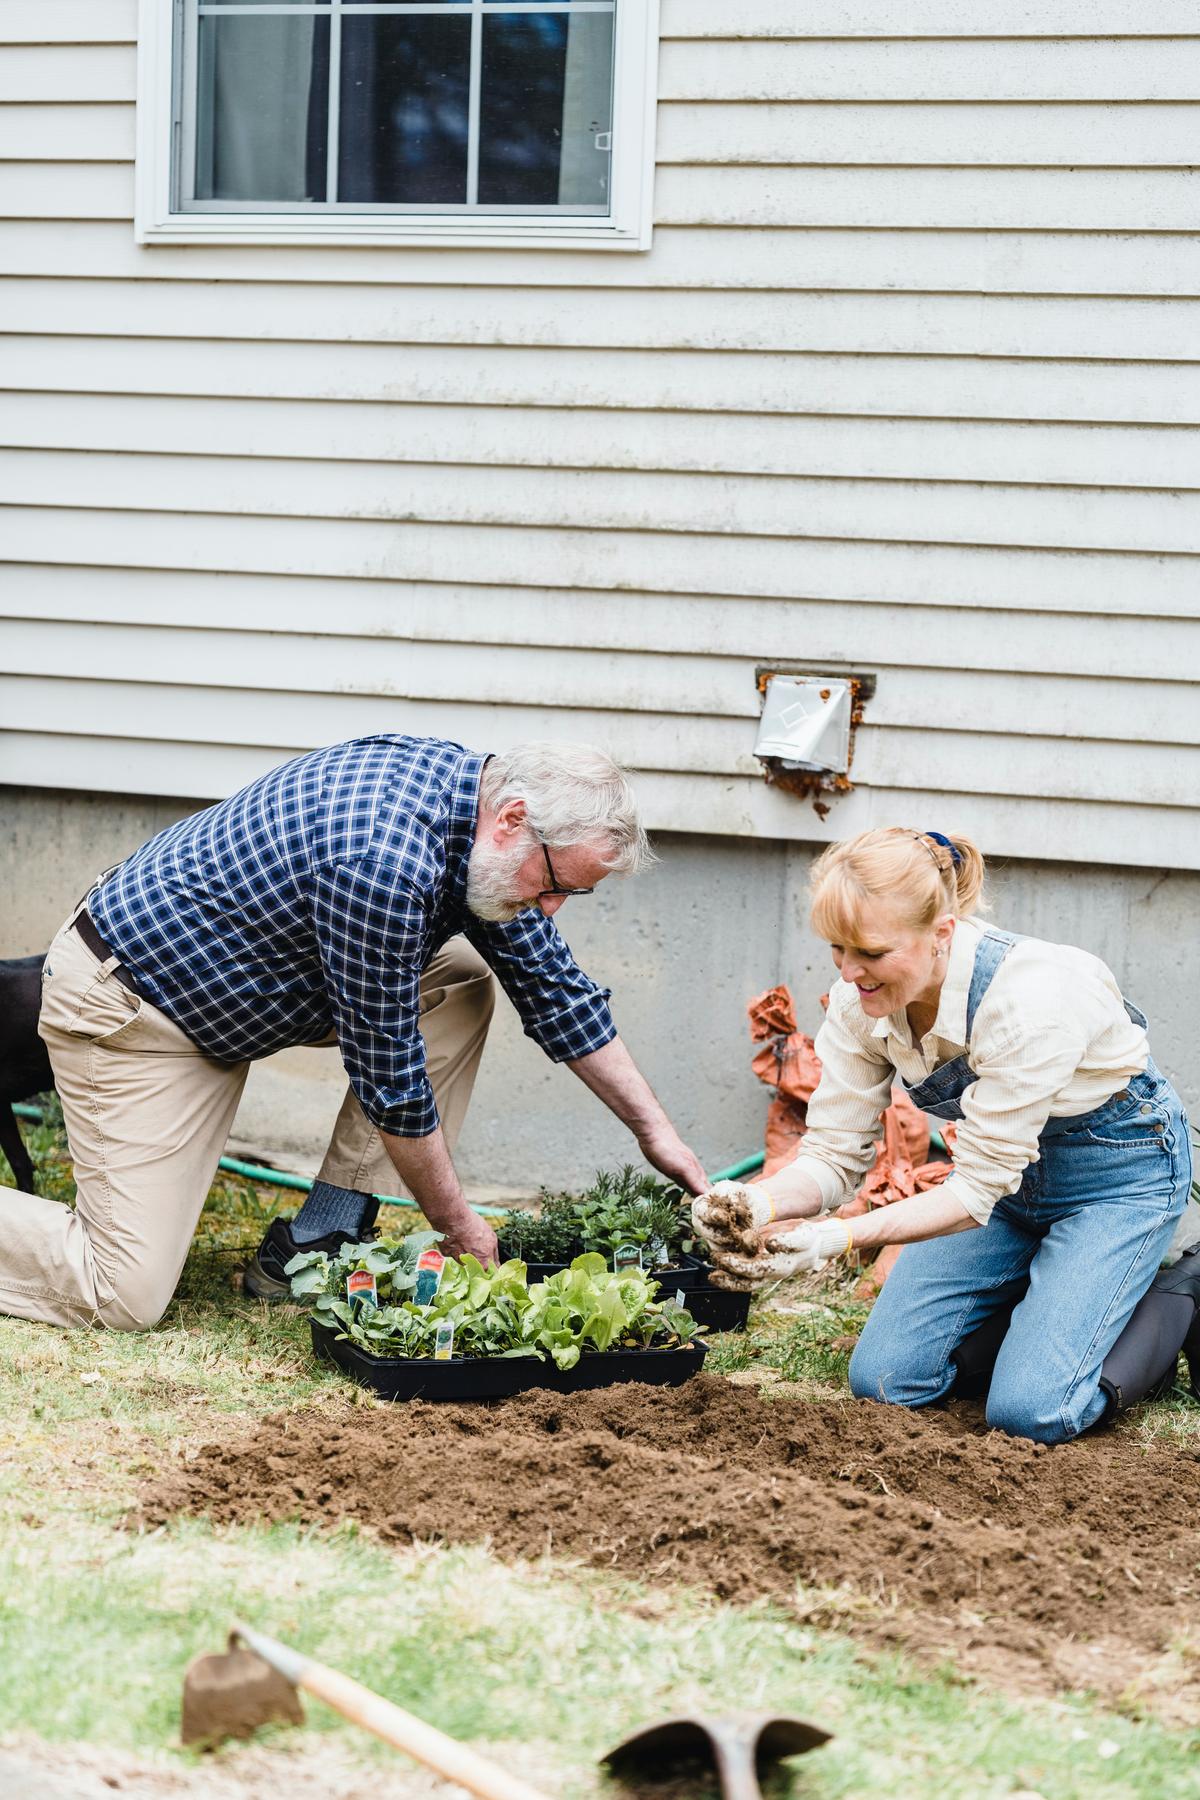 Before planting your garden, consider which plants would make good neighbors. (Greta Hoffman/Pexels)